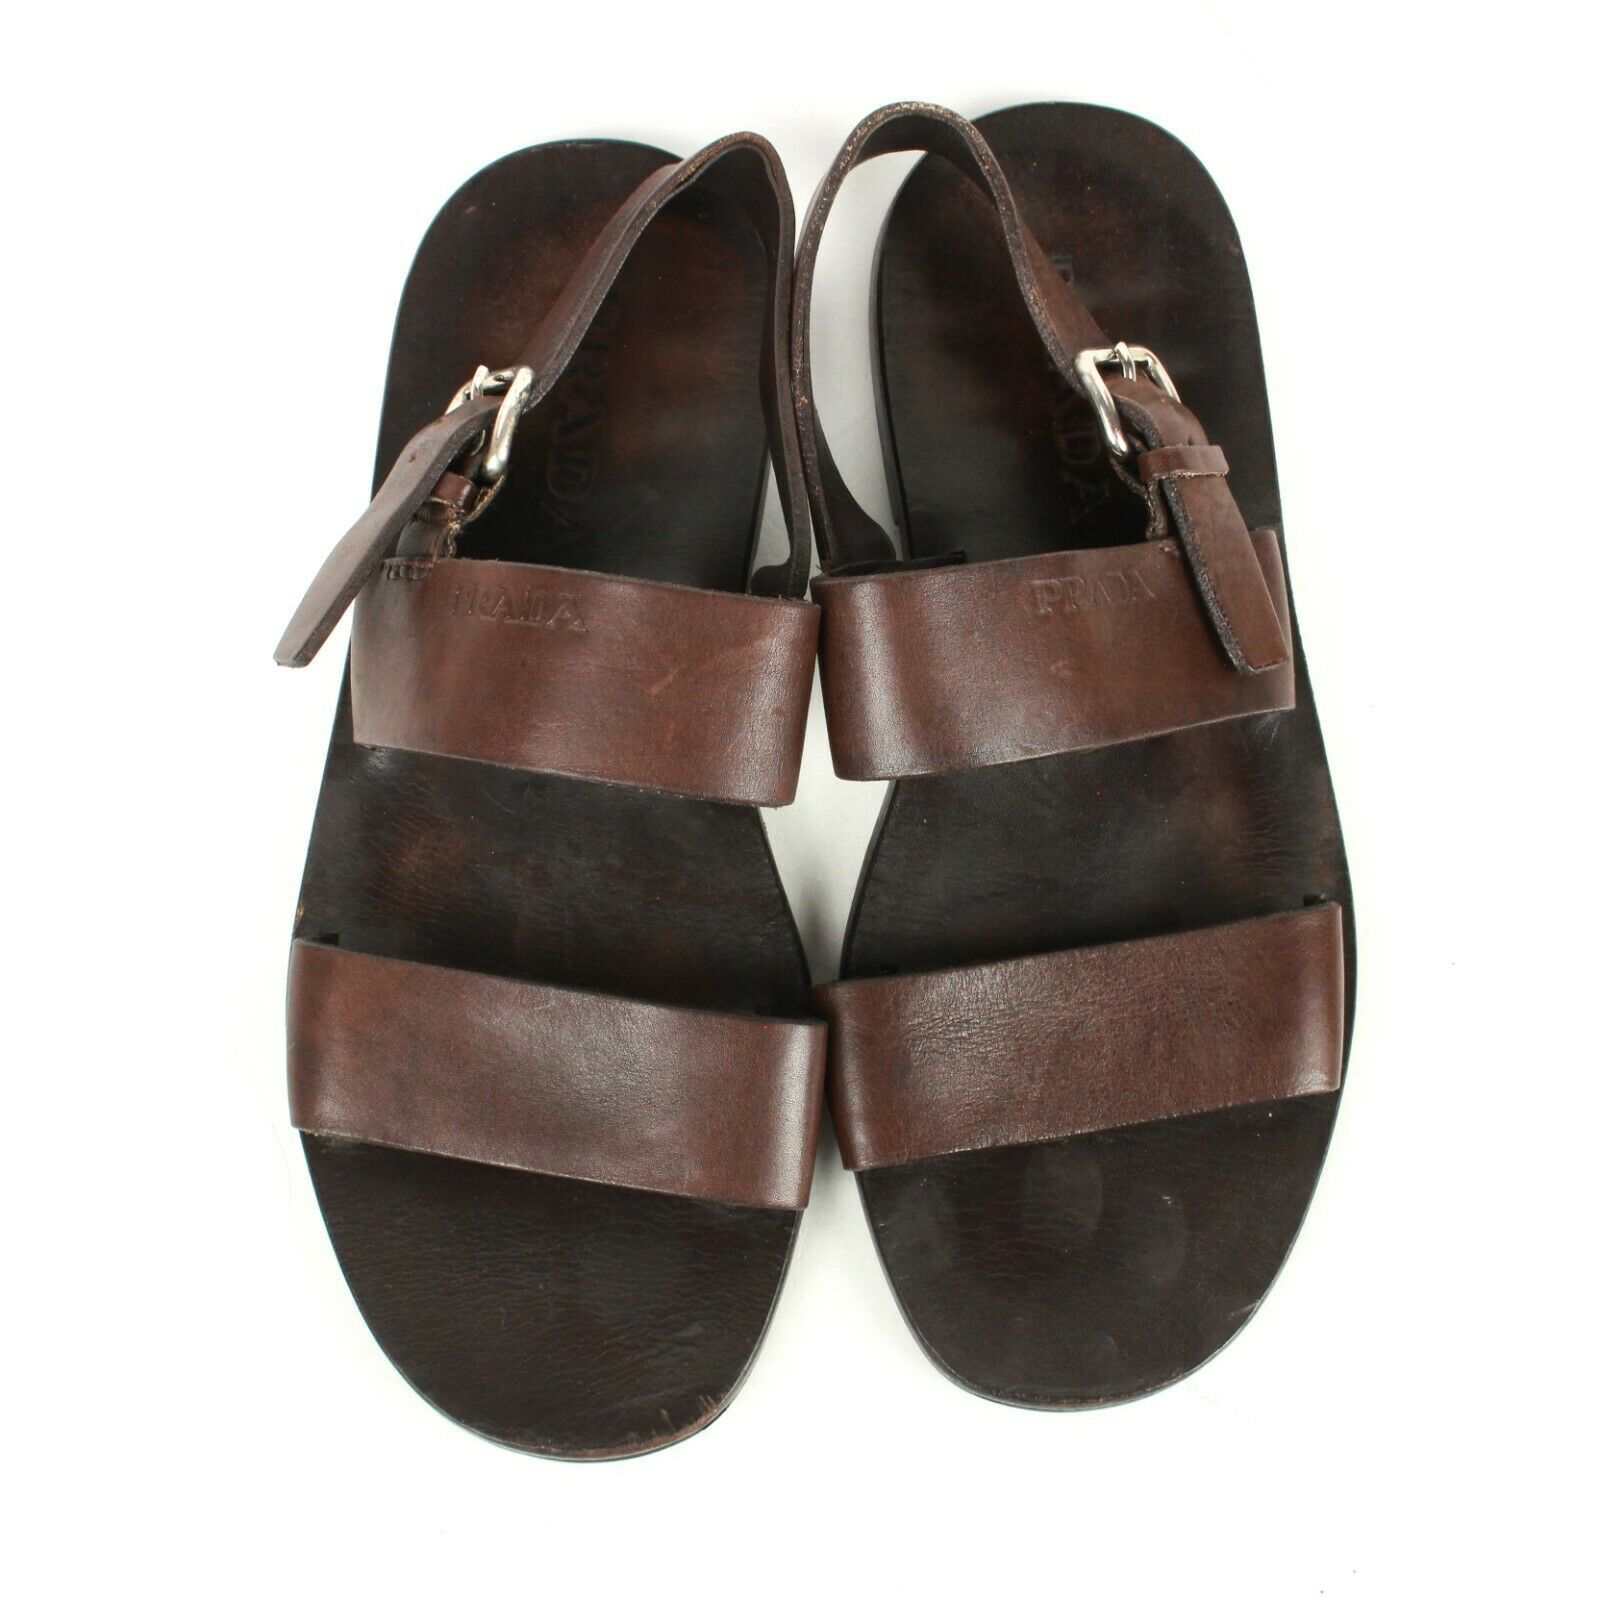 Brown Two Strap Sandals - CraftySandals.com